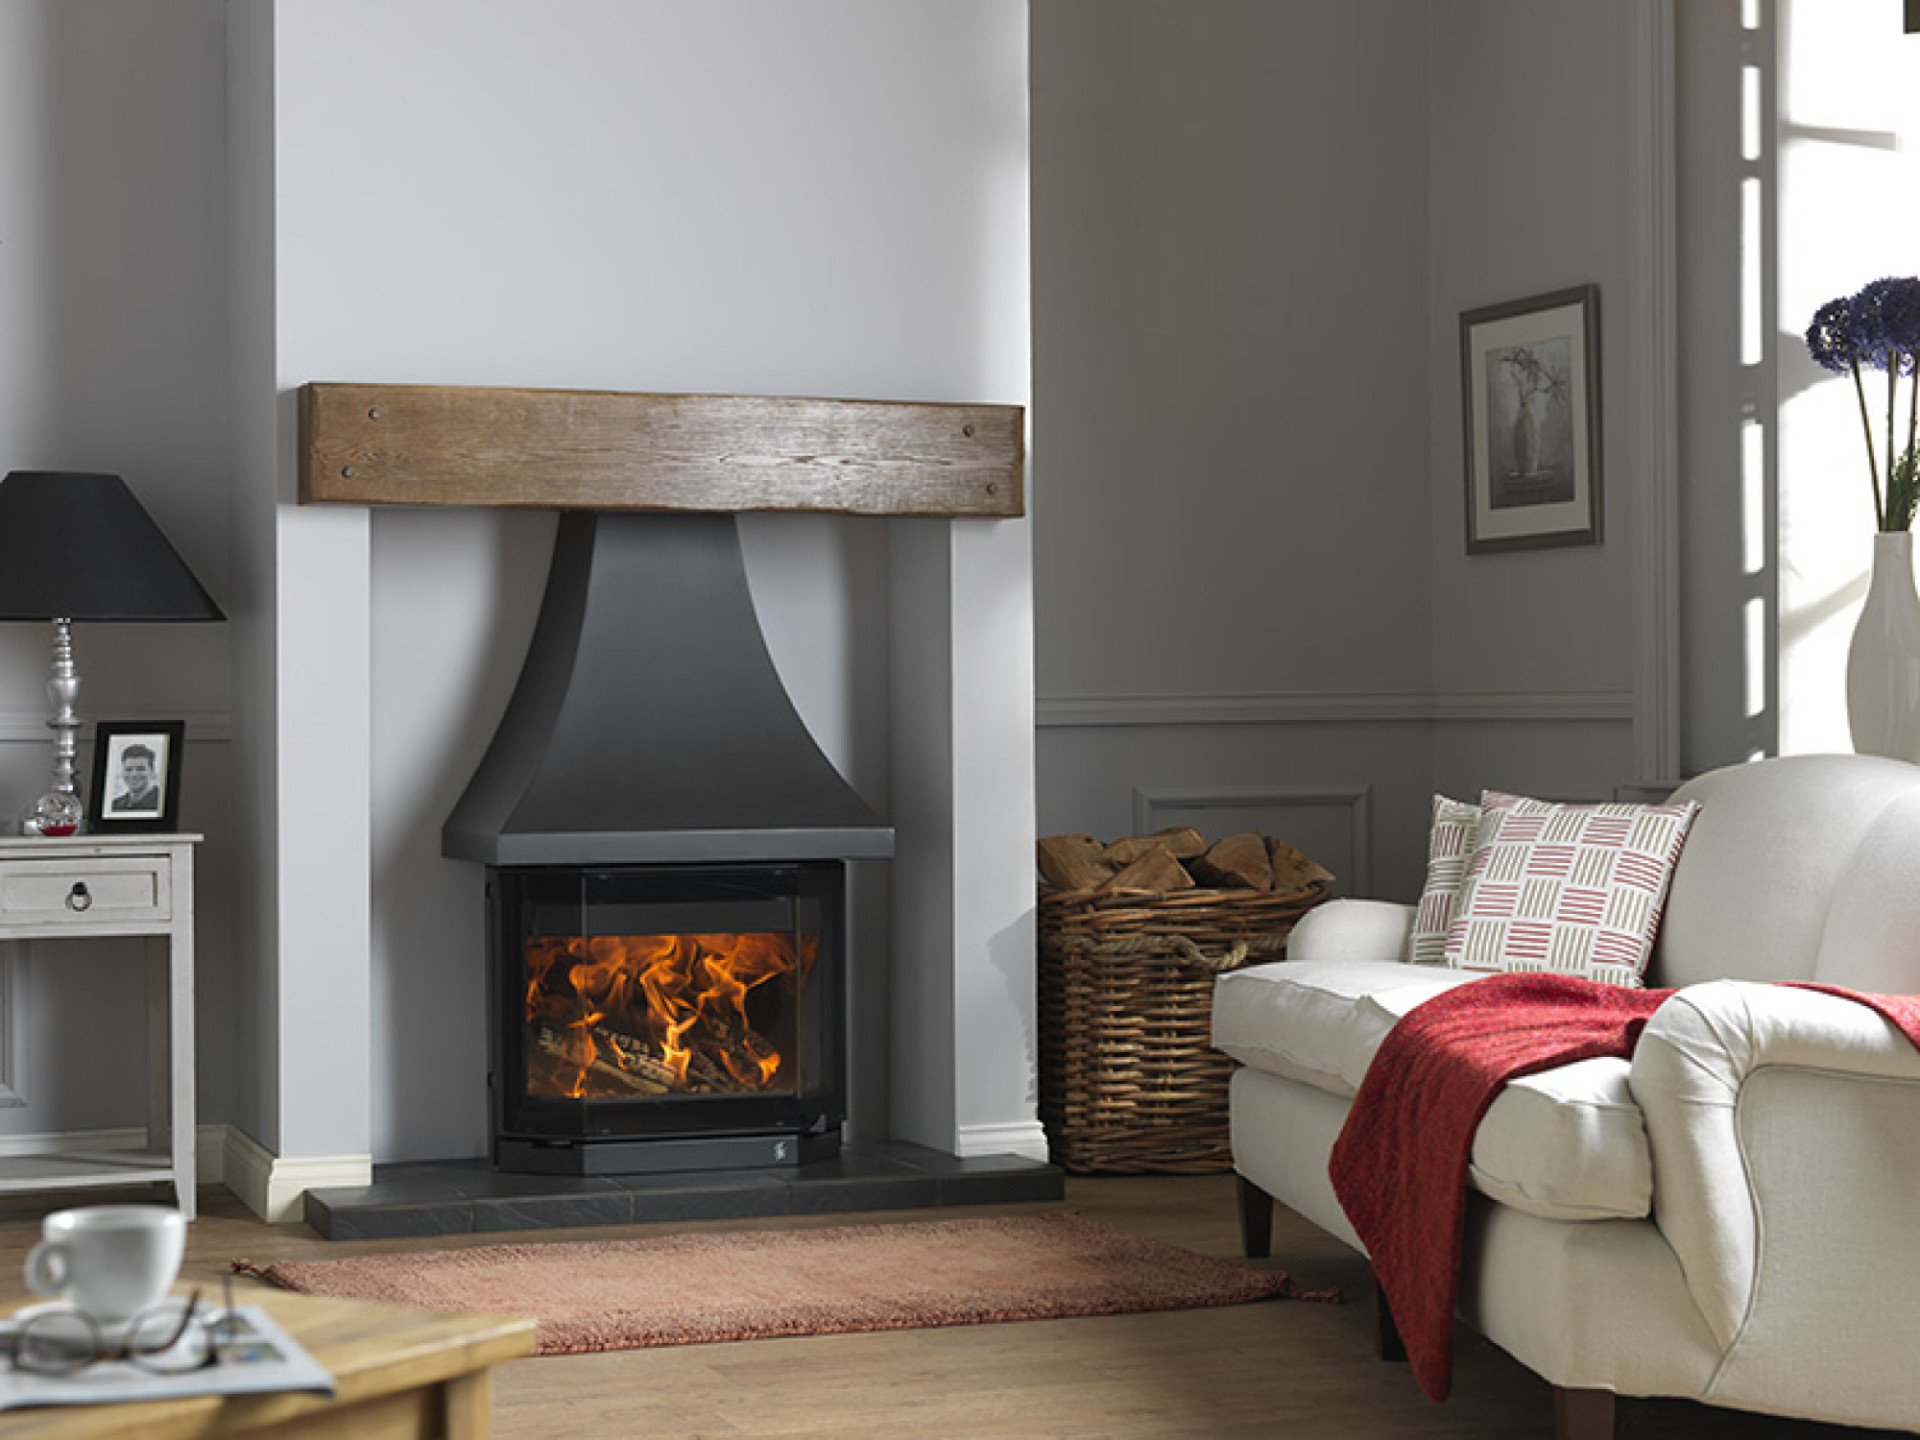 https://www.bowlandstoves.co.uk/blog/wp-content/uploads/2018/10/ACR-Elmdale-Stove-class-in-glass.jpg